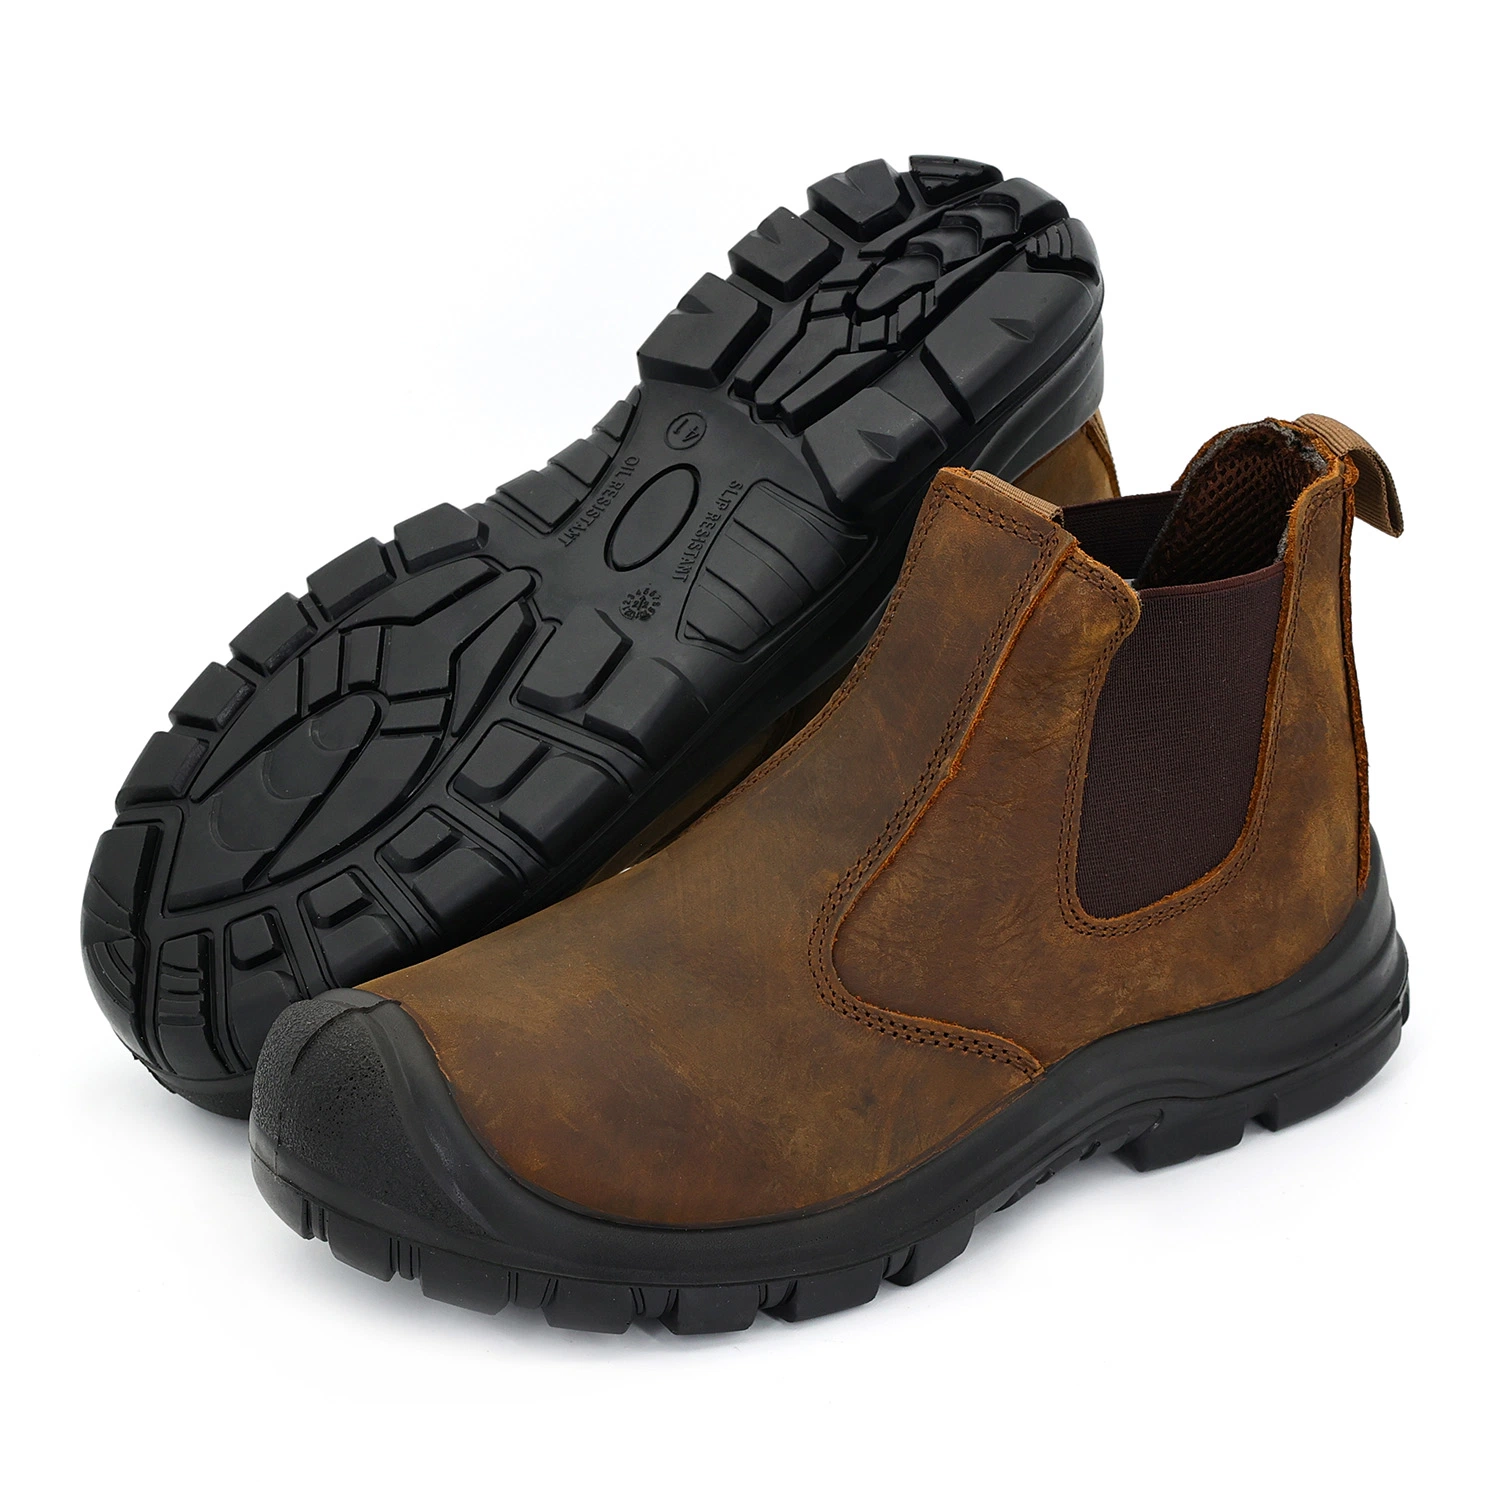 Steel Toe Cap and Steel Plate Chemical Resistant Safety Labor Shoes Safety Work Boots